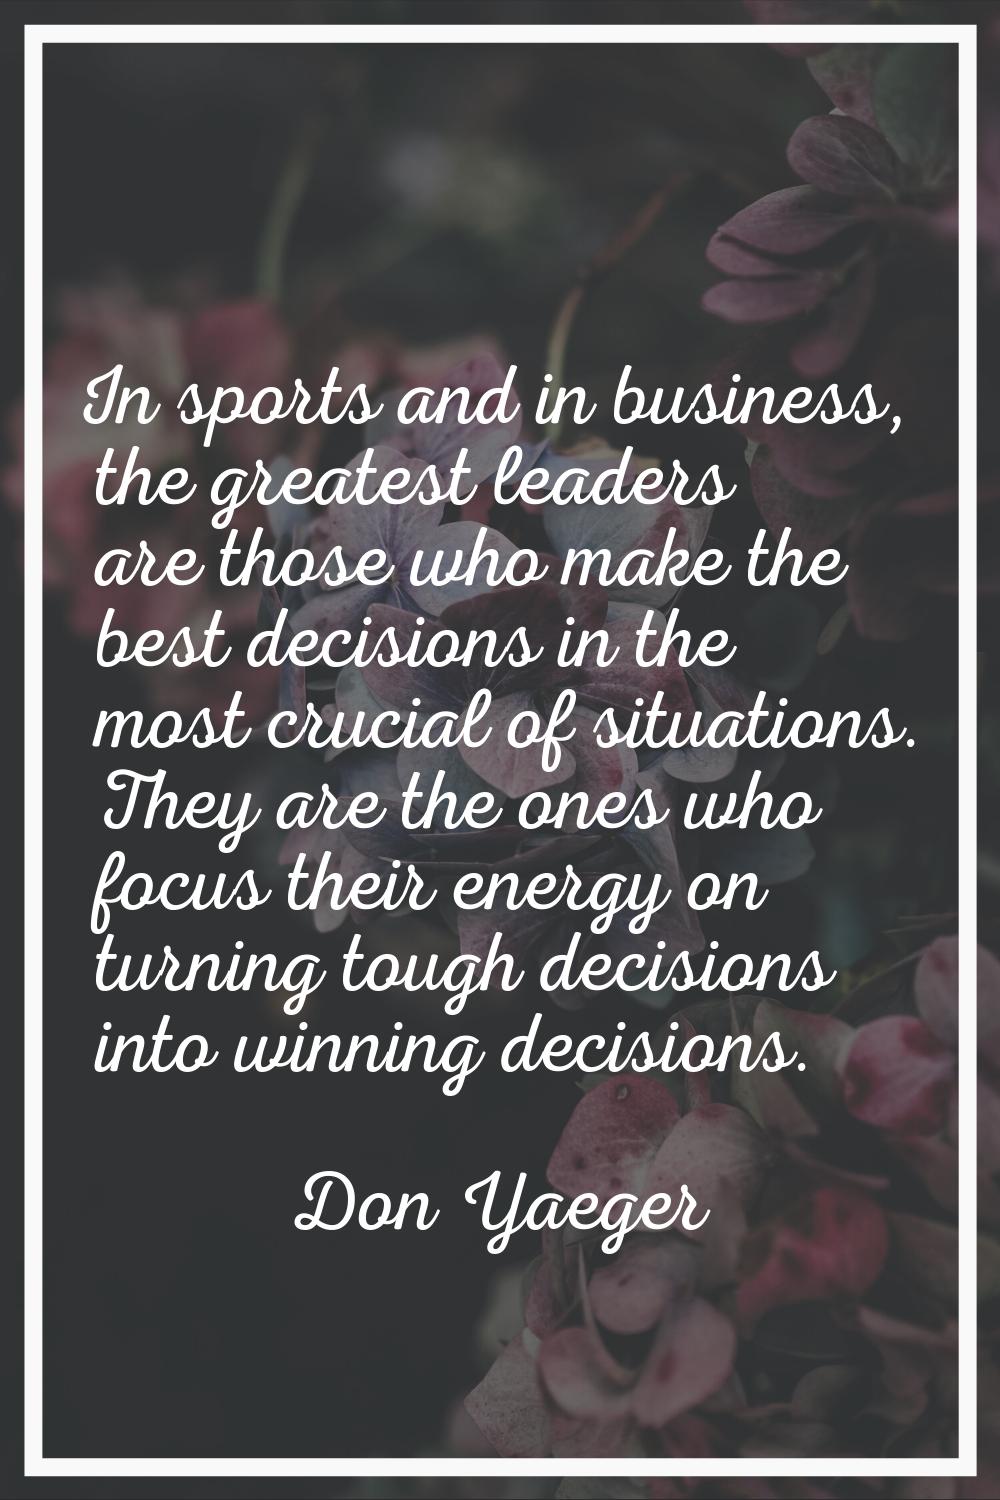 In sports and in business, the greatest leaders are those who make the best decisions in the most c